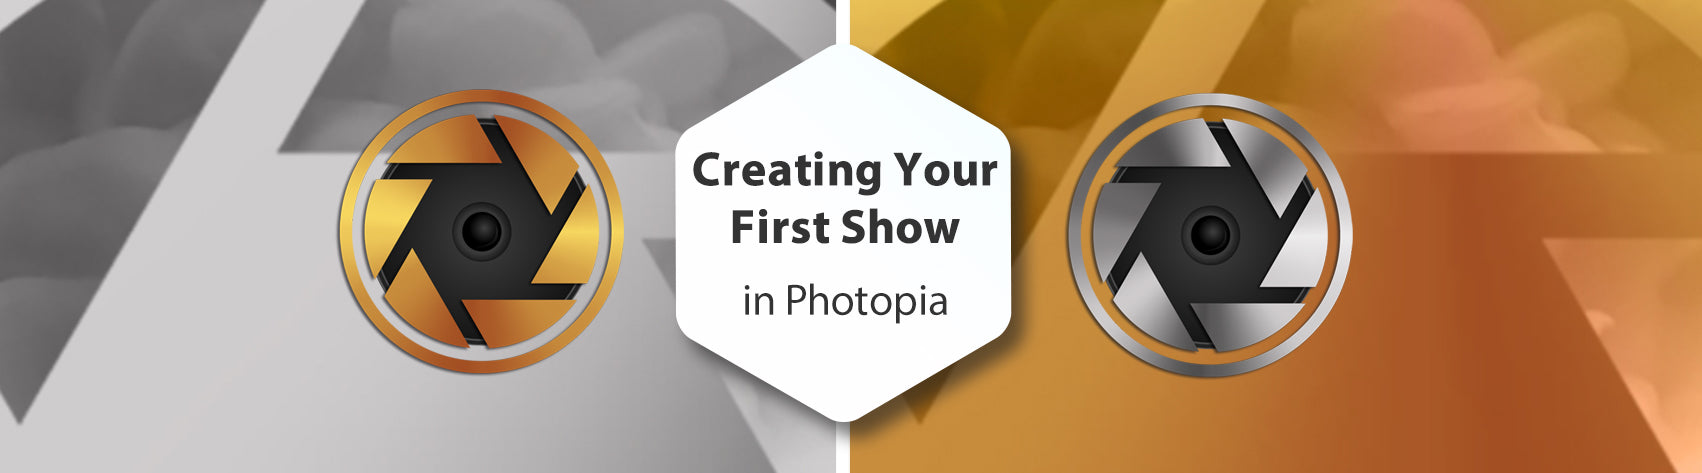 Creating your first show in Photopia